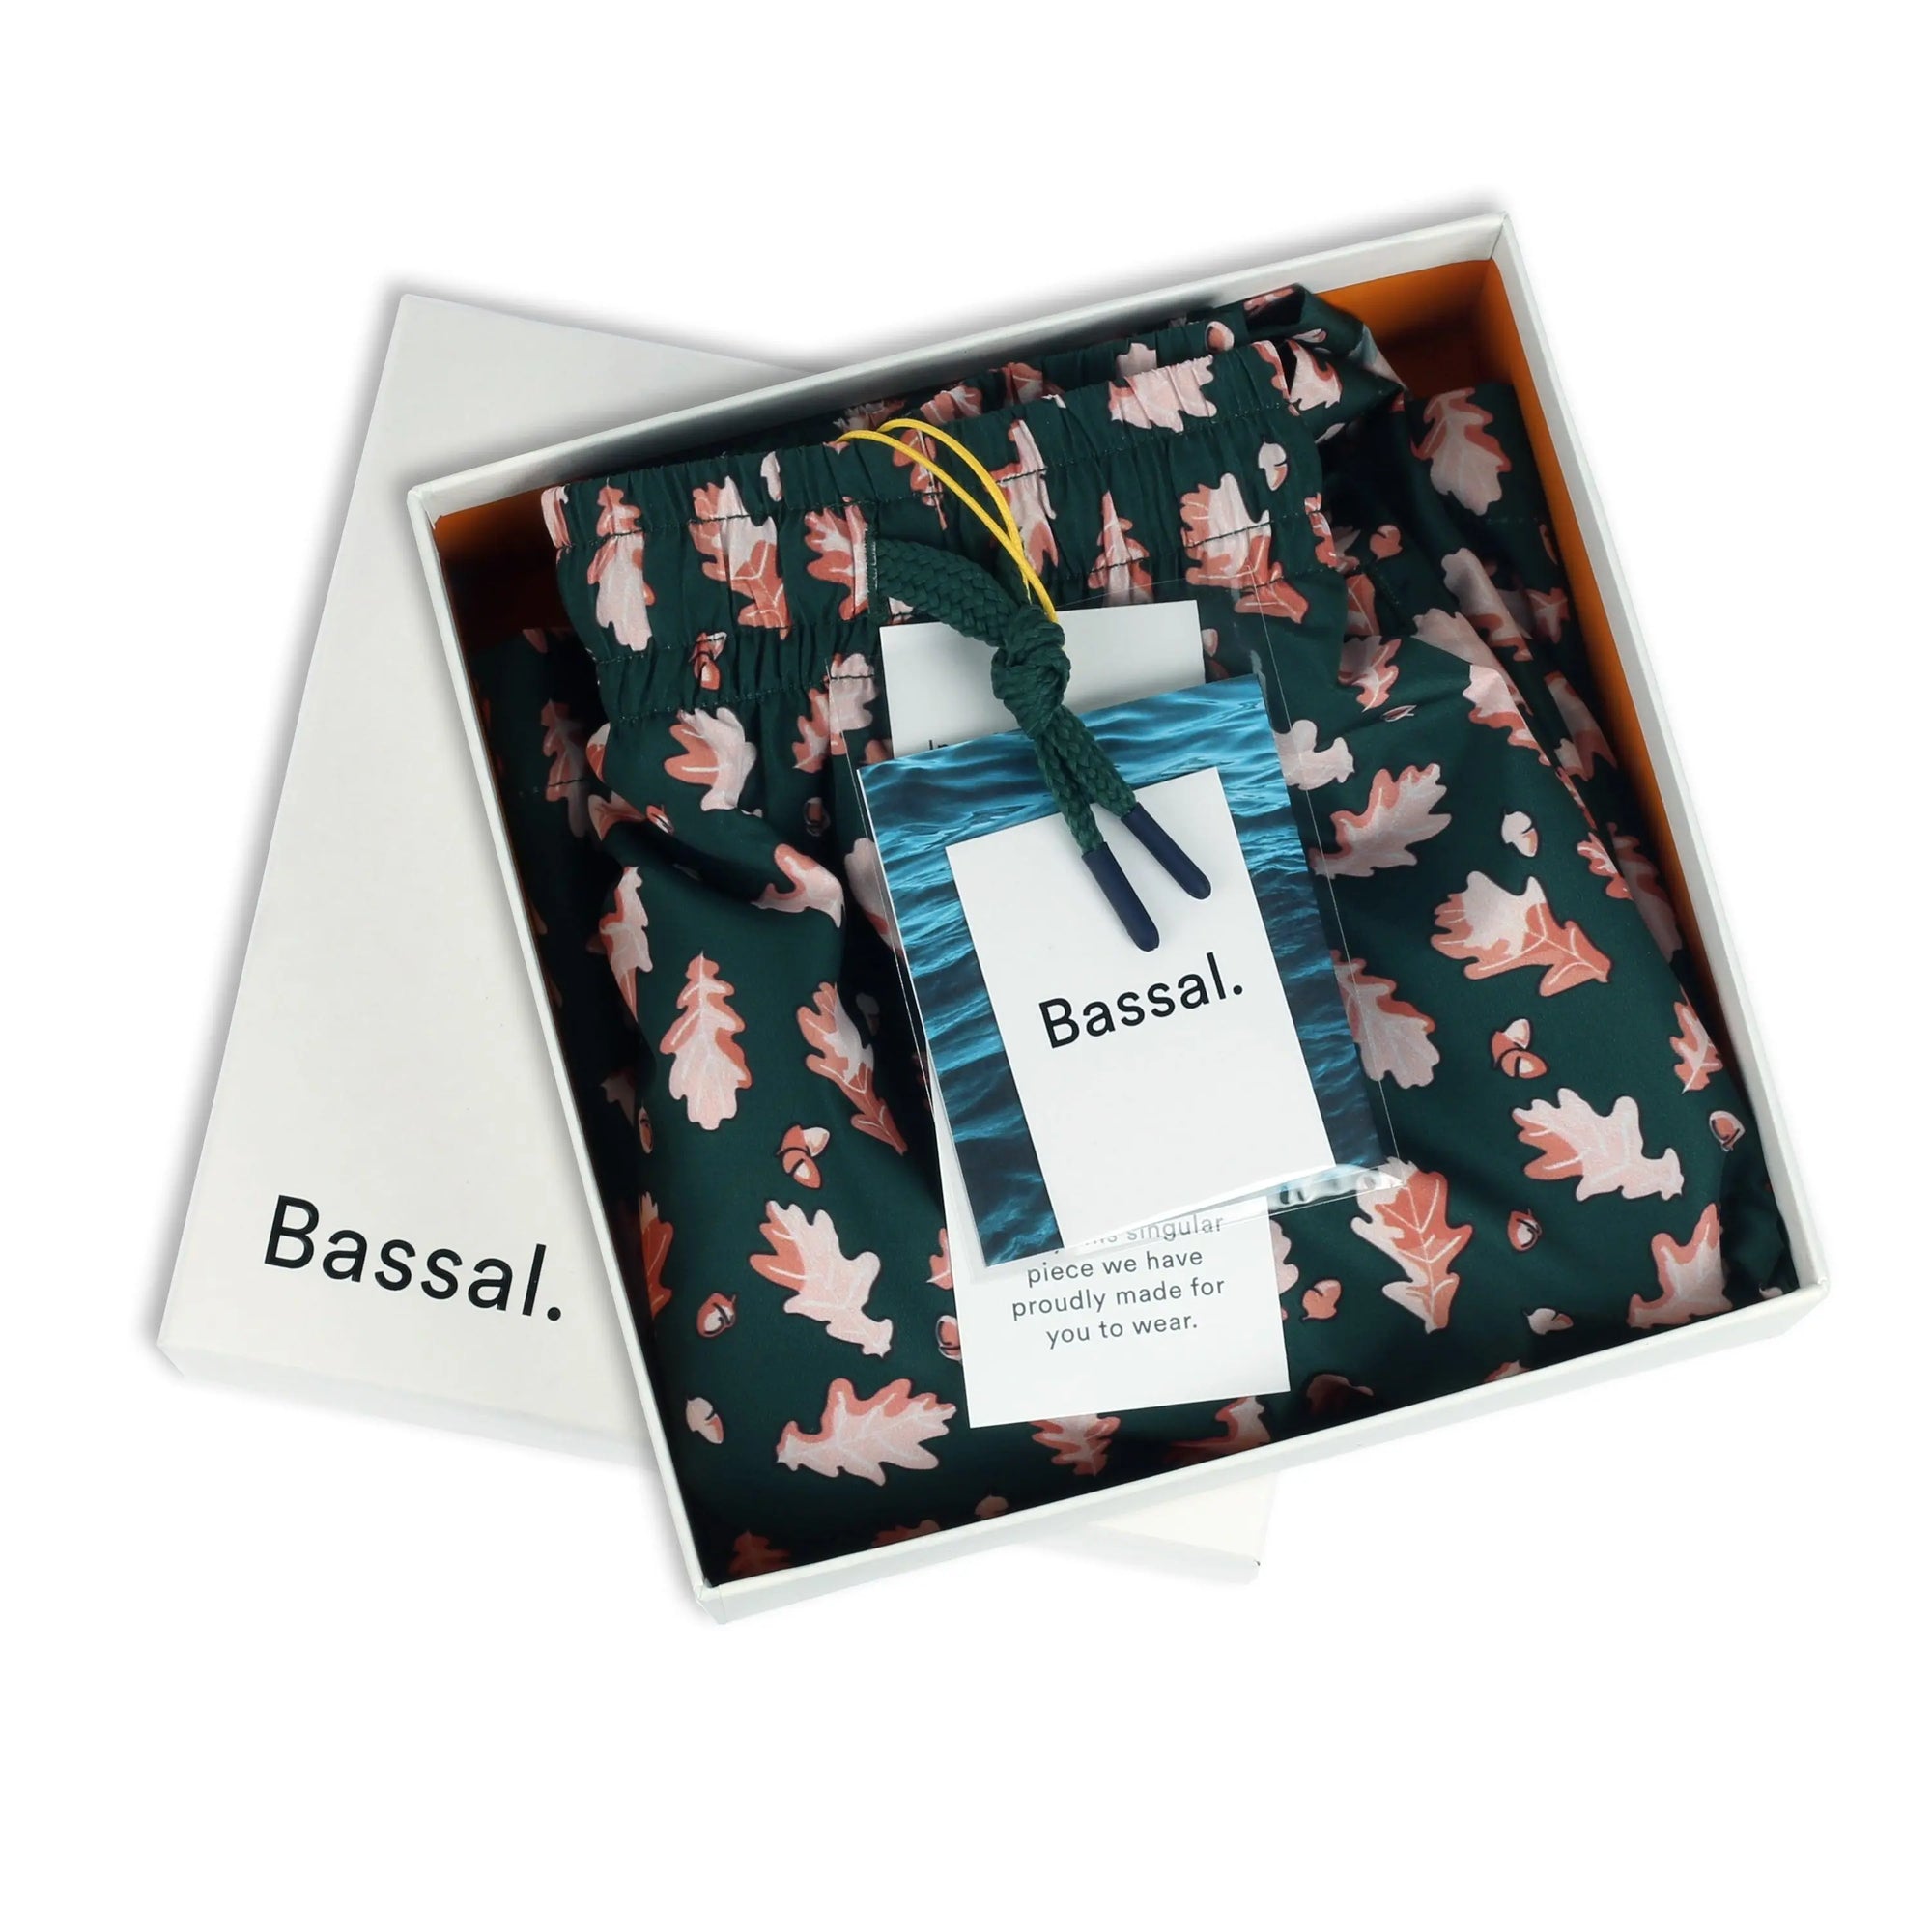 An open white box displays a pair of folded navy blue Acorn Swimwear adorned with a pink leaf pattern. Attached to the swimwear is a white tag bearing the brand name "Bassal." The partially visible box lid in the background also reads "Bassal." This item is available exclusively at bassalstore in Barcelona.